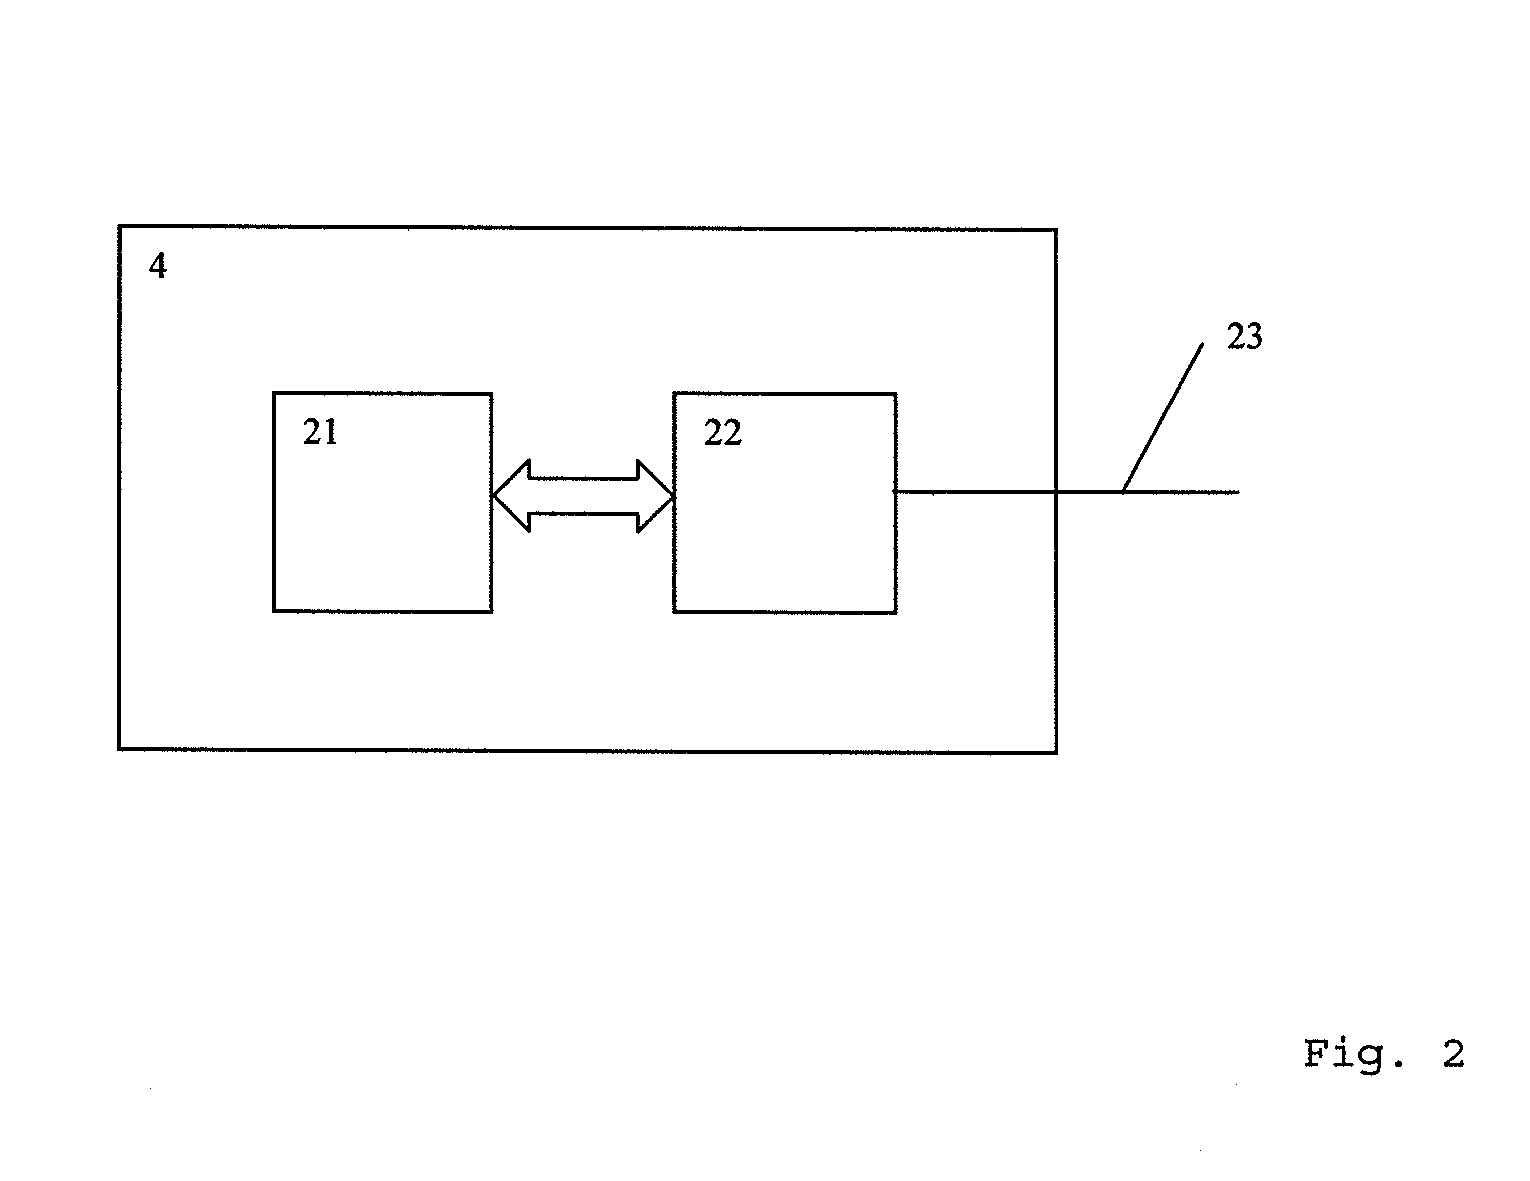 Monitoring Device for a Motor-Driven Door